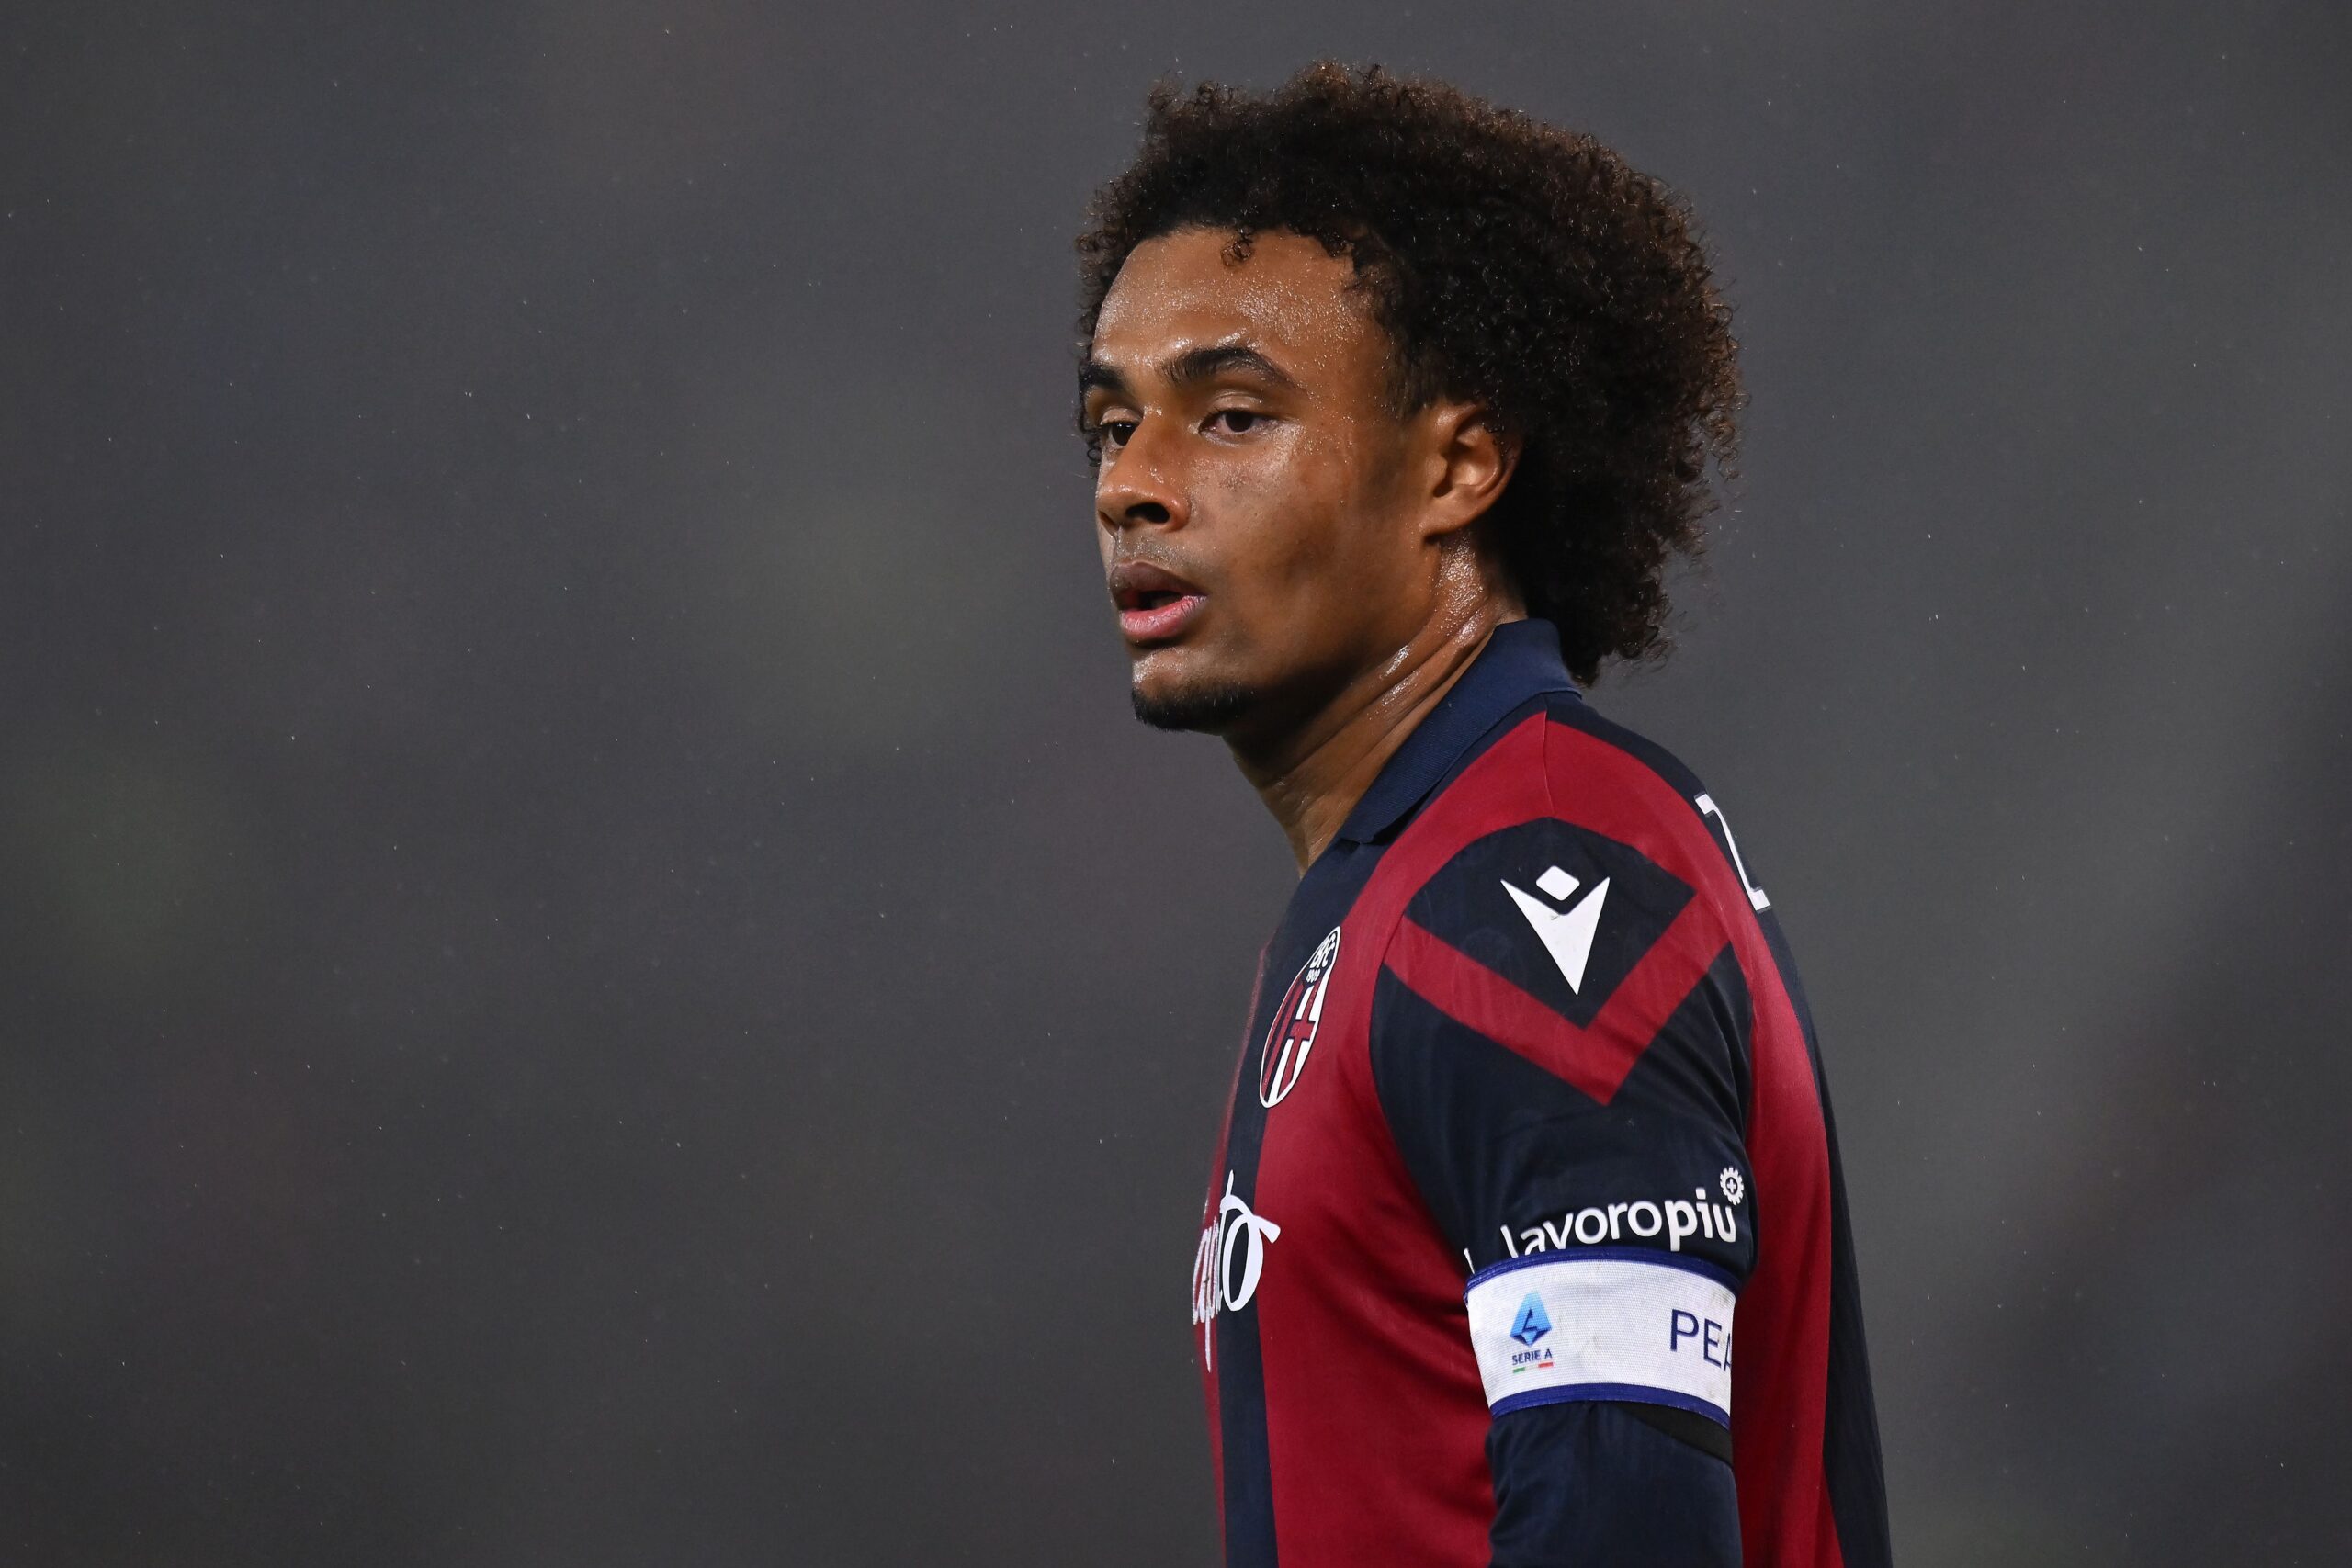 Milan have been attached to a few young strikers to either succeed or join Olivier Giroud up front next season, but Joshua Zirkzee stays at the top.